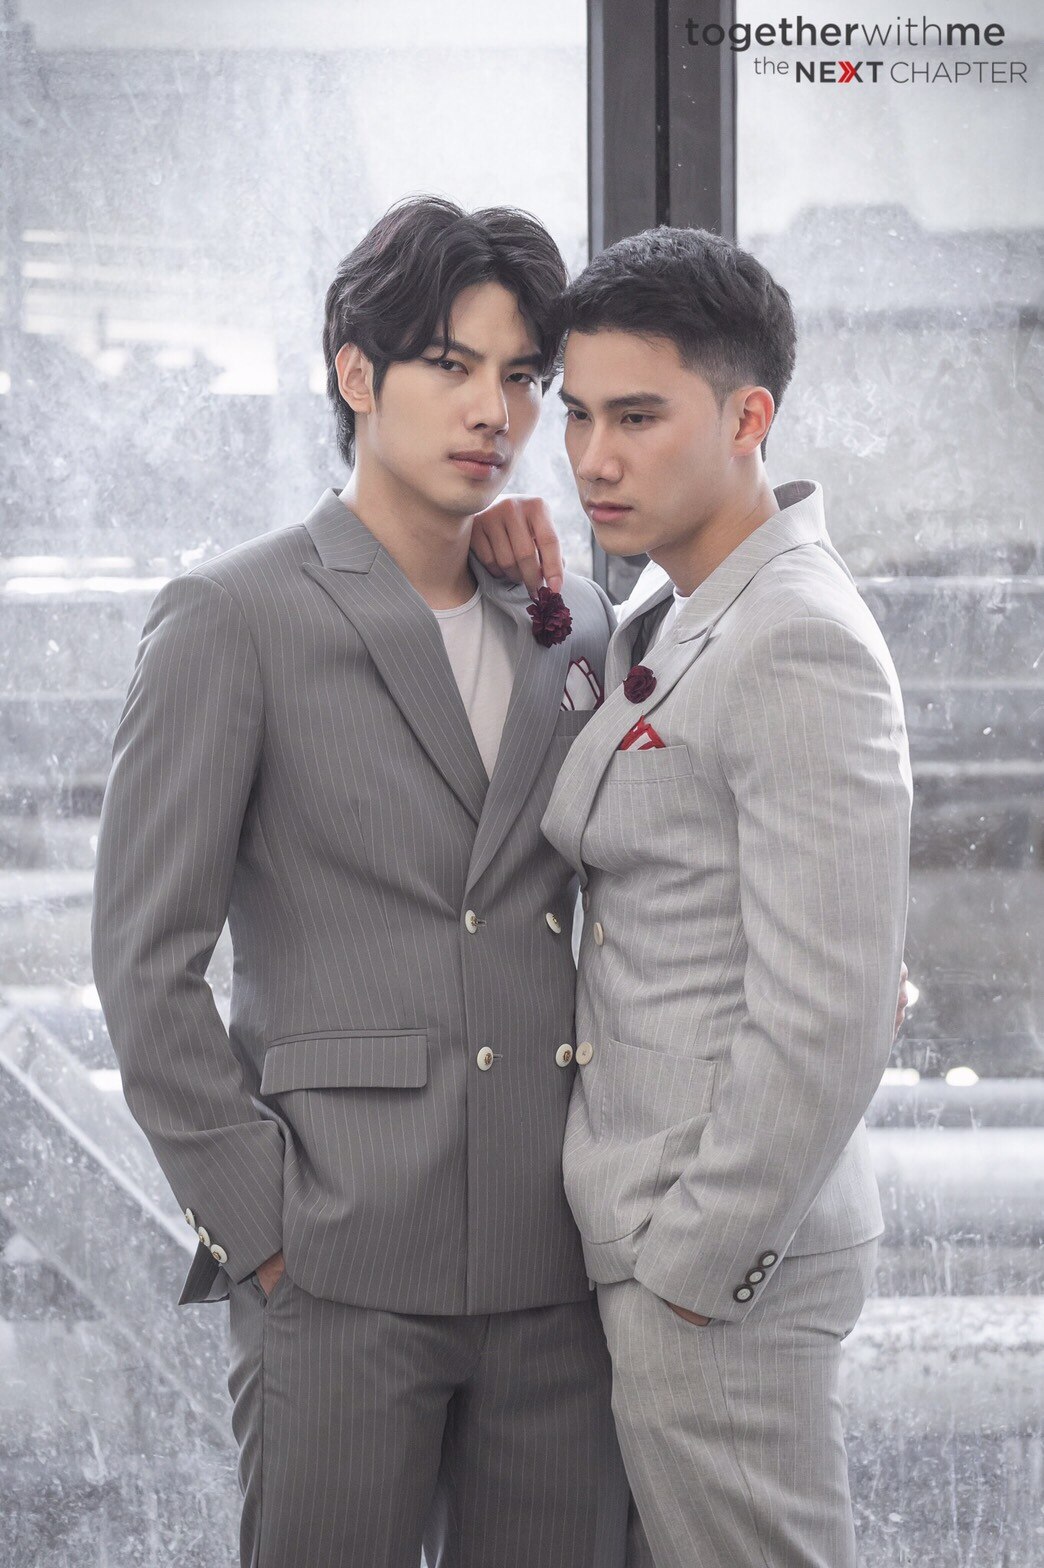 Boys love The unstoppable rise of same-sex soapies in Thailand